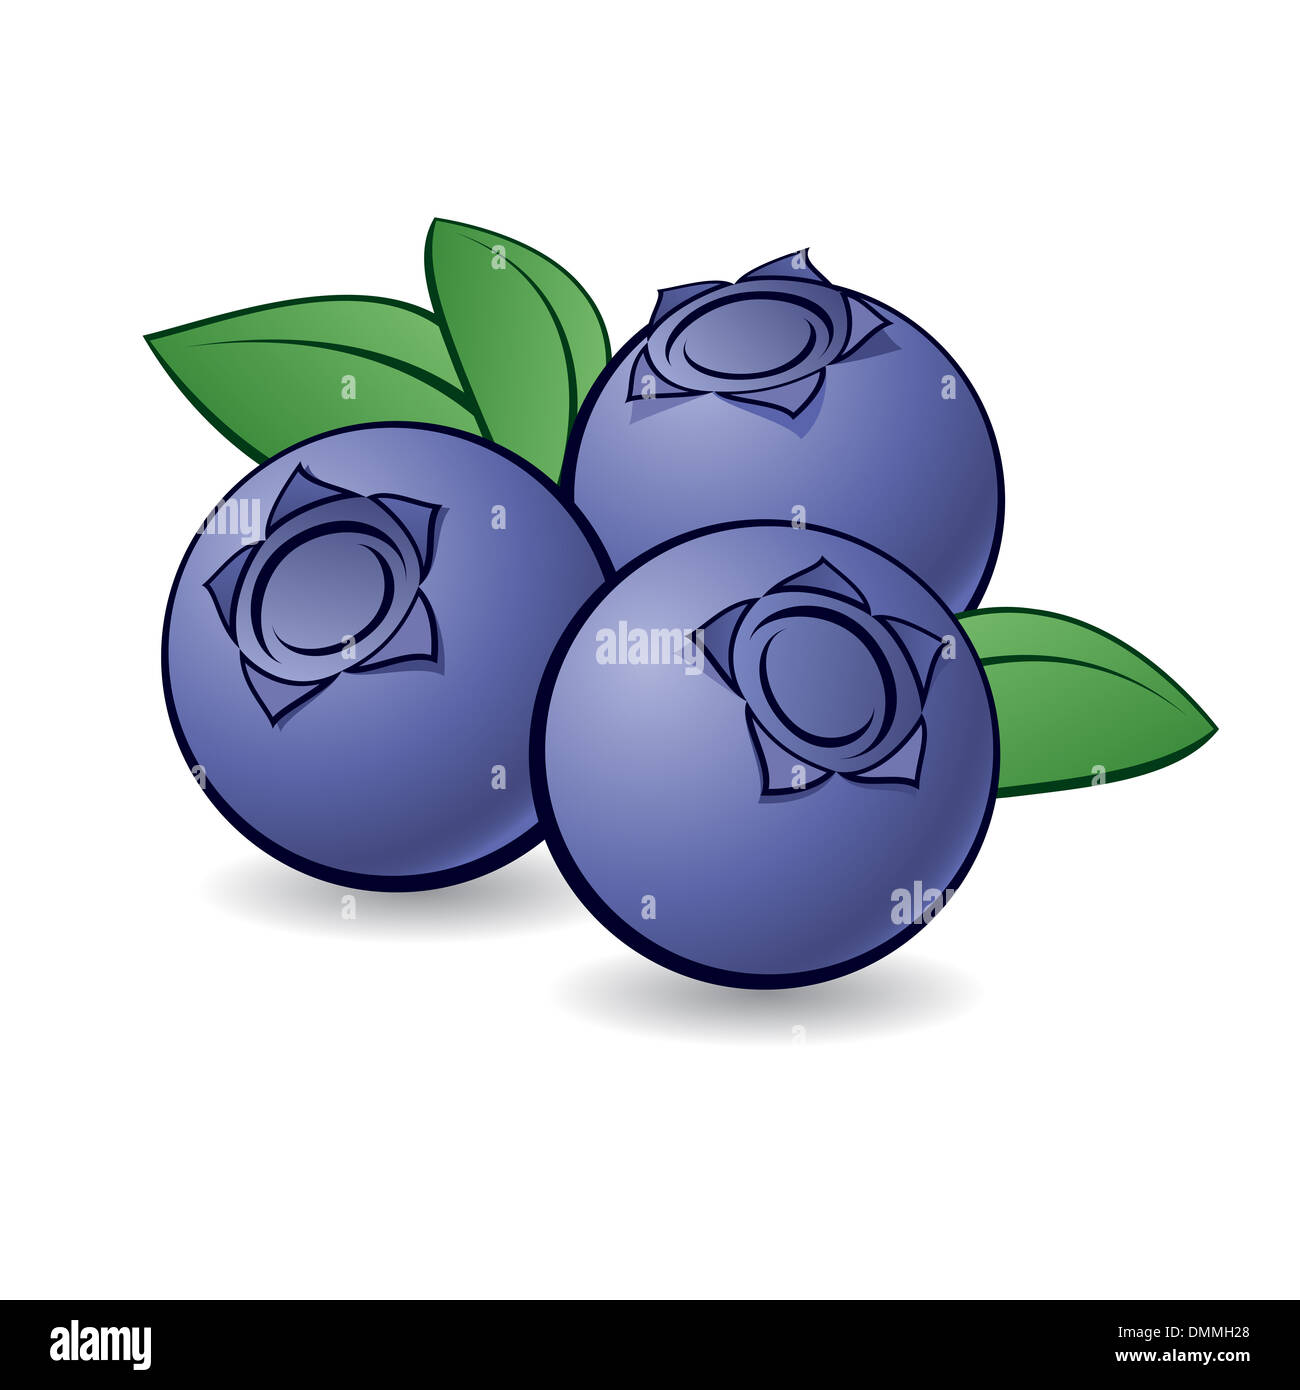 Cartoon blueberry with green leaves on white background Stock Photo - Alamy